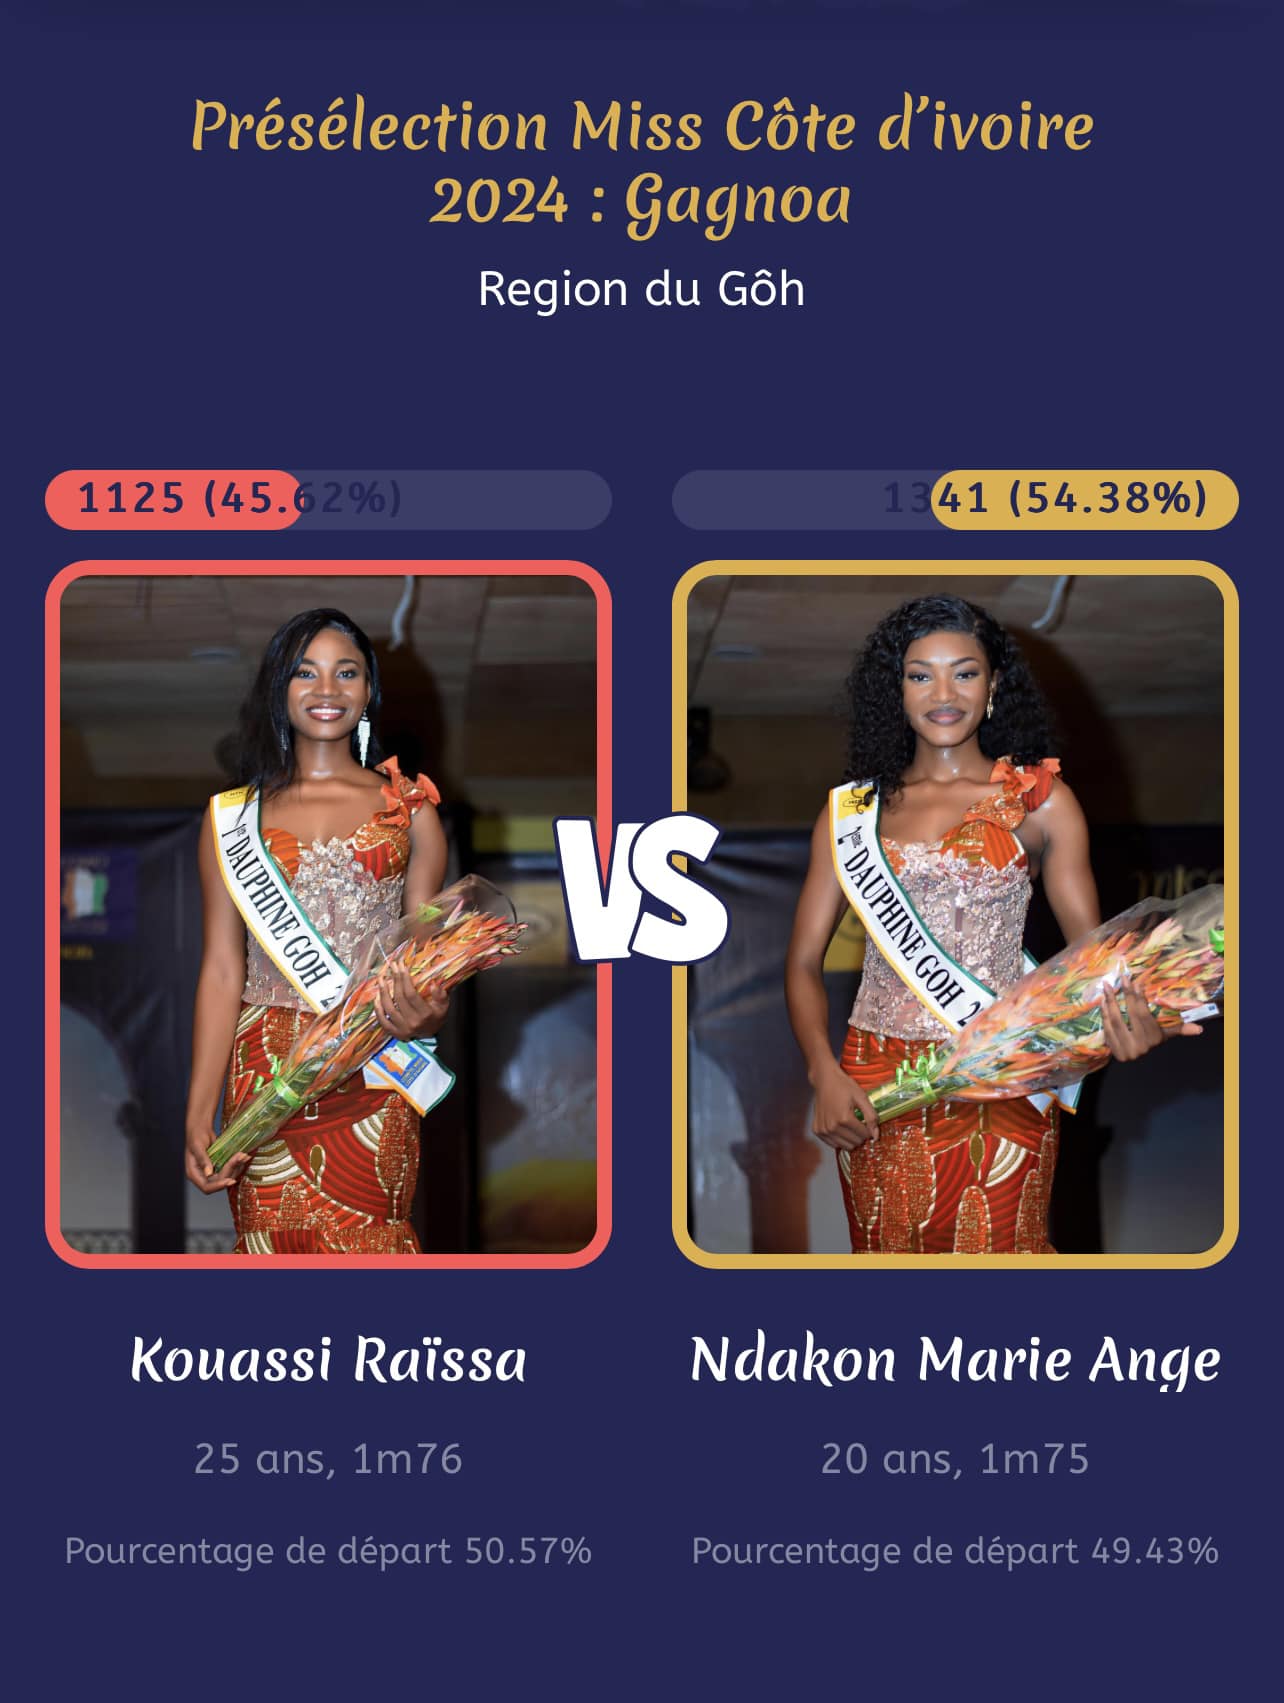 End of Gagnoa face-off - the result :Ndakon Marie Ange candidate N° 5, is the 2nd representative of the Gôh region for the National final with a consolidated result of 51.90% including 1341 clicks. 